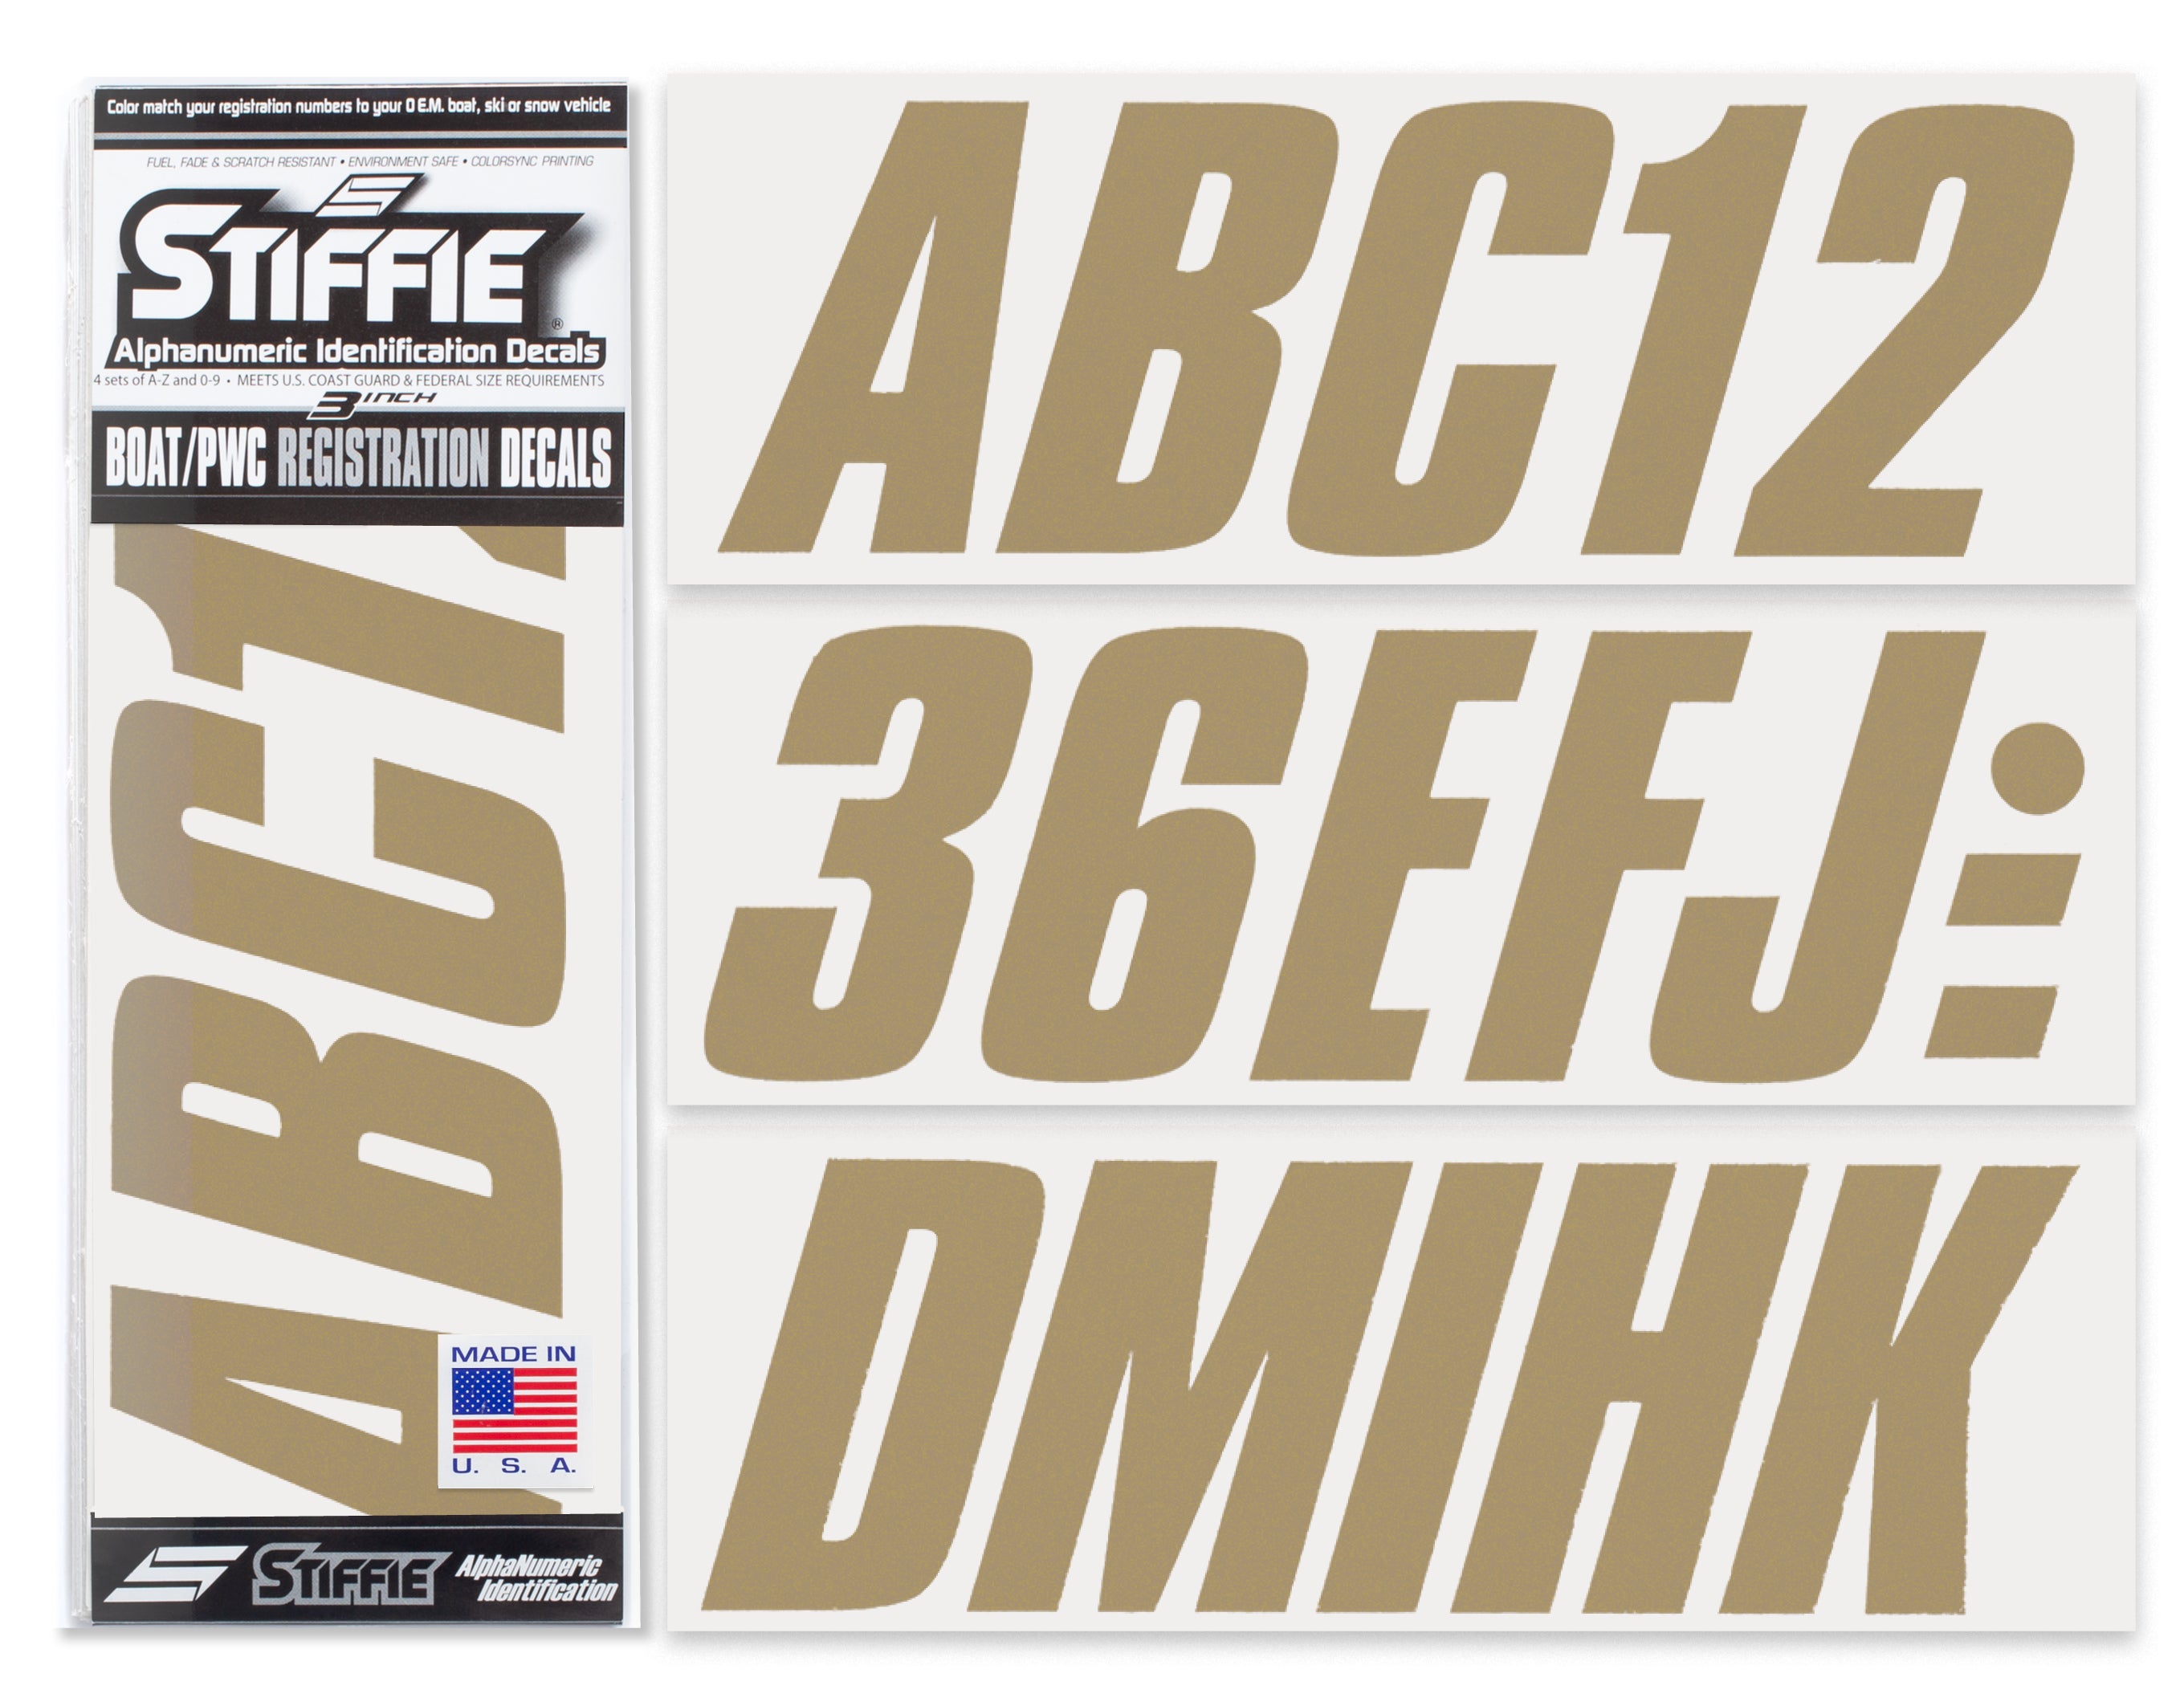 STIFFIE Shift Metallic Gold 3" ID Kit Alpha-Numeric Registration Identification Numbers Stickers Decals for Boats & Personal Watercraft